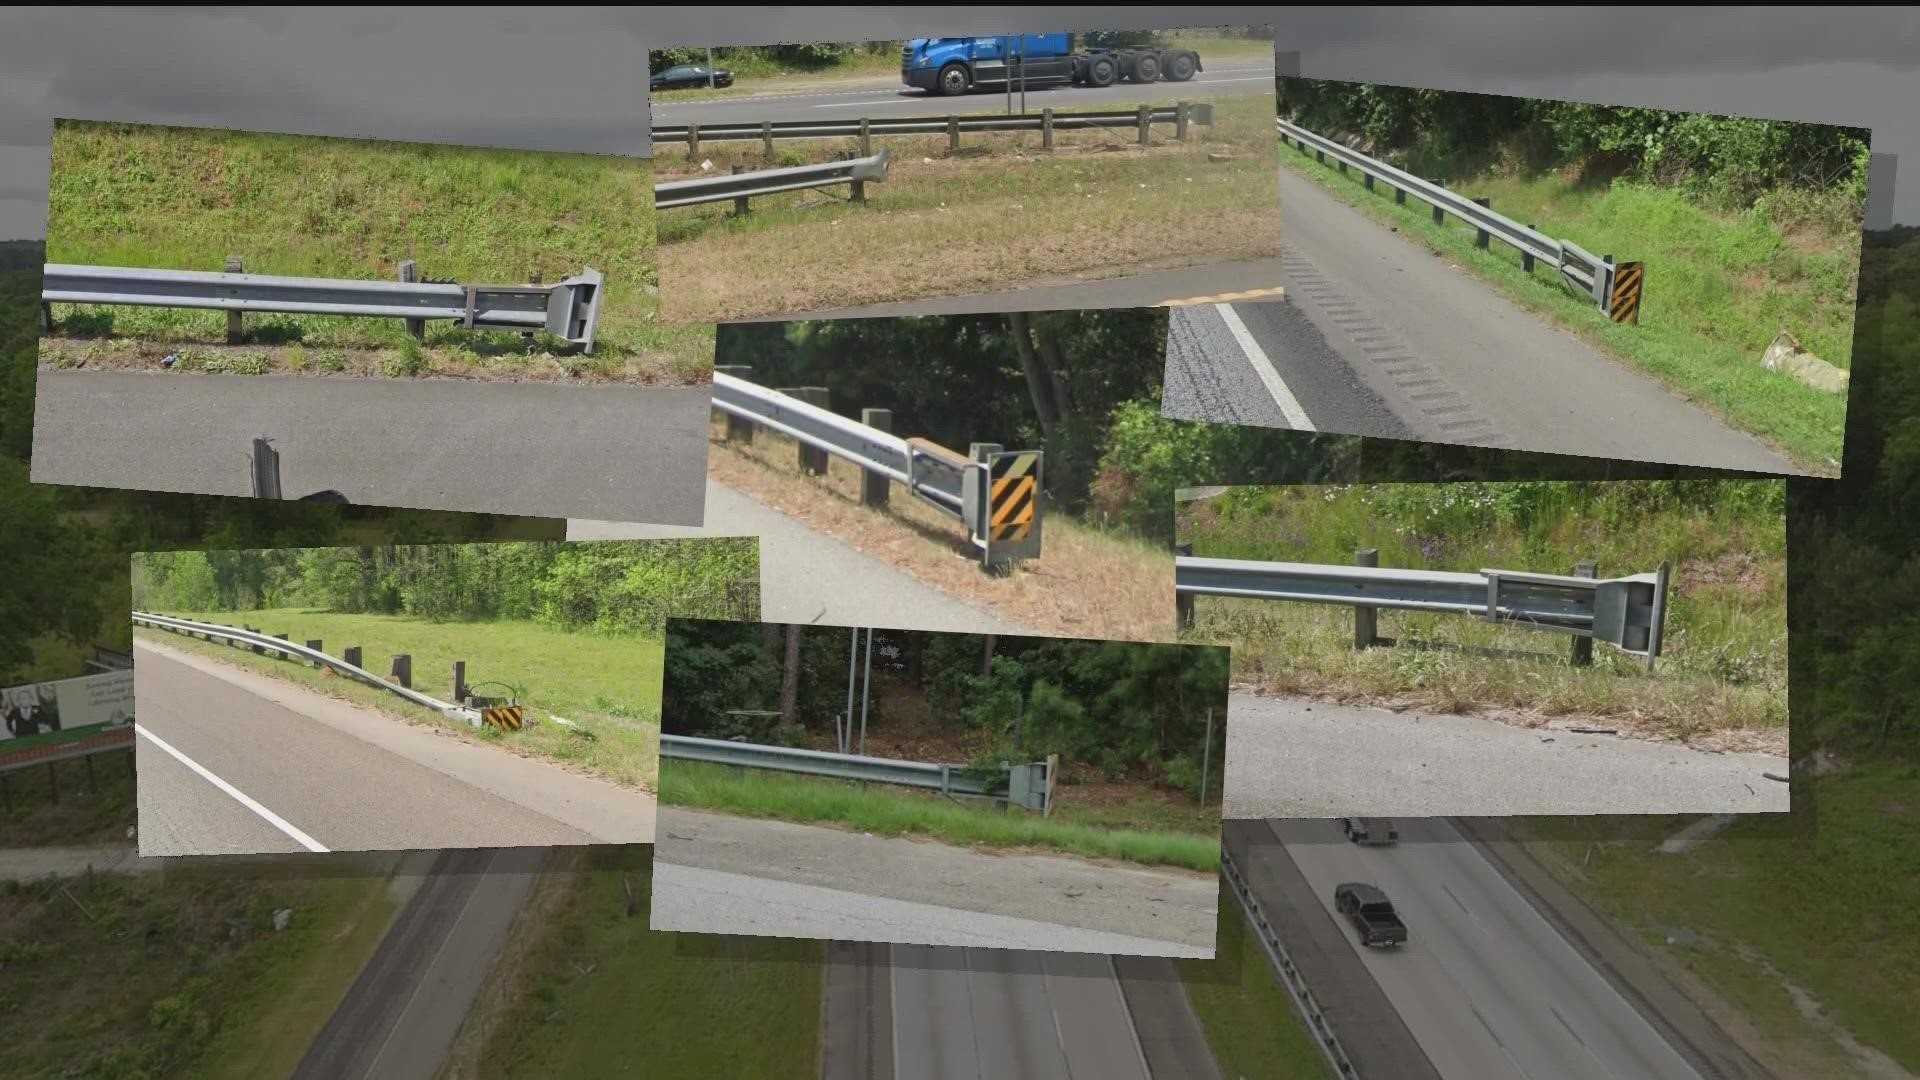 Guardrails across the state are being inspected right now after 11Alive uncovered potential hazards on the highways.